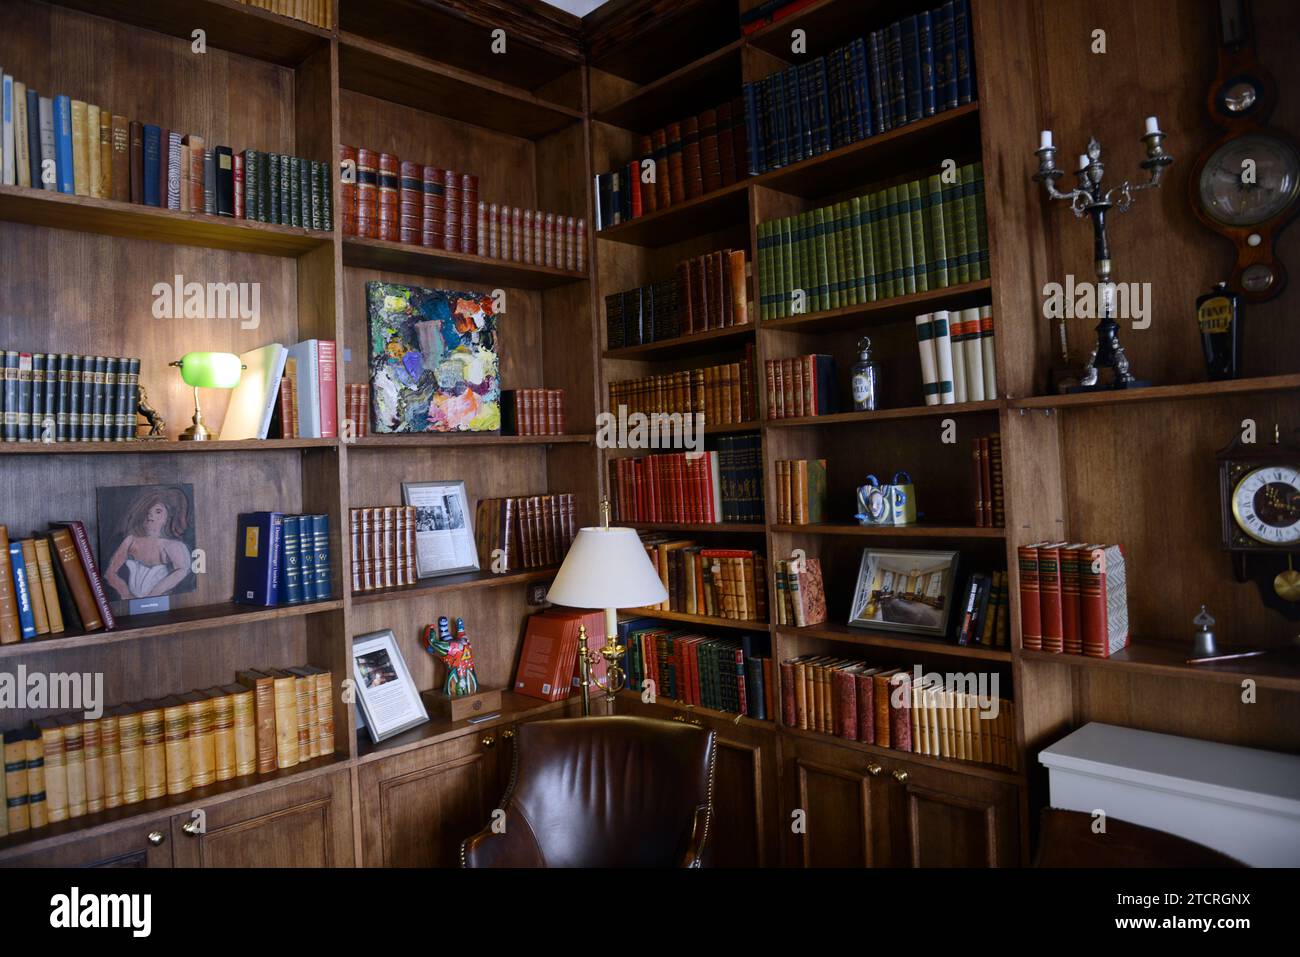 The old library located at the Mayfair Hotel Tunneln in the old city of Malmö, Sweden. Stock Photo